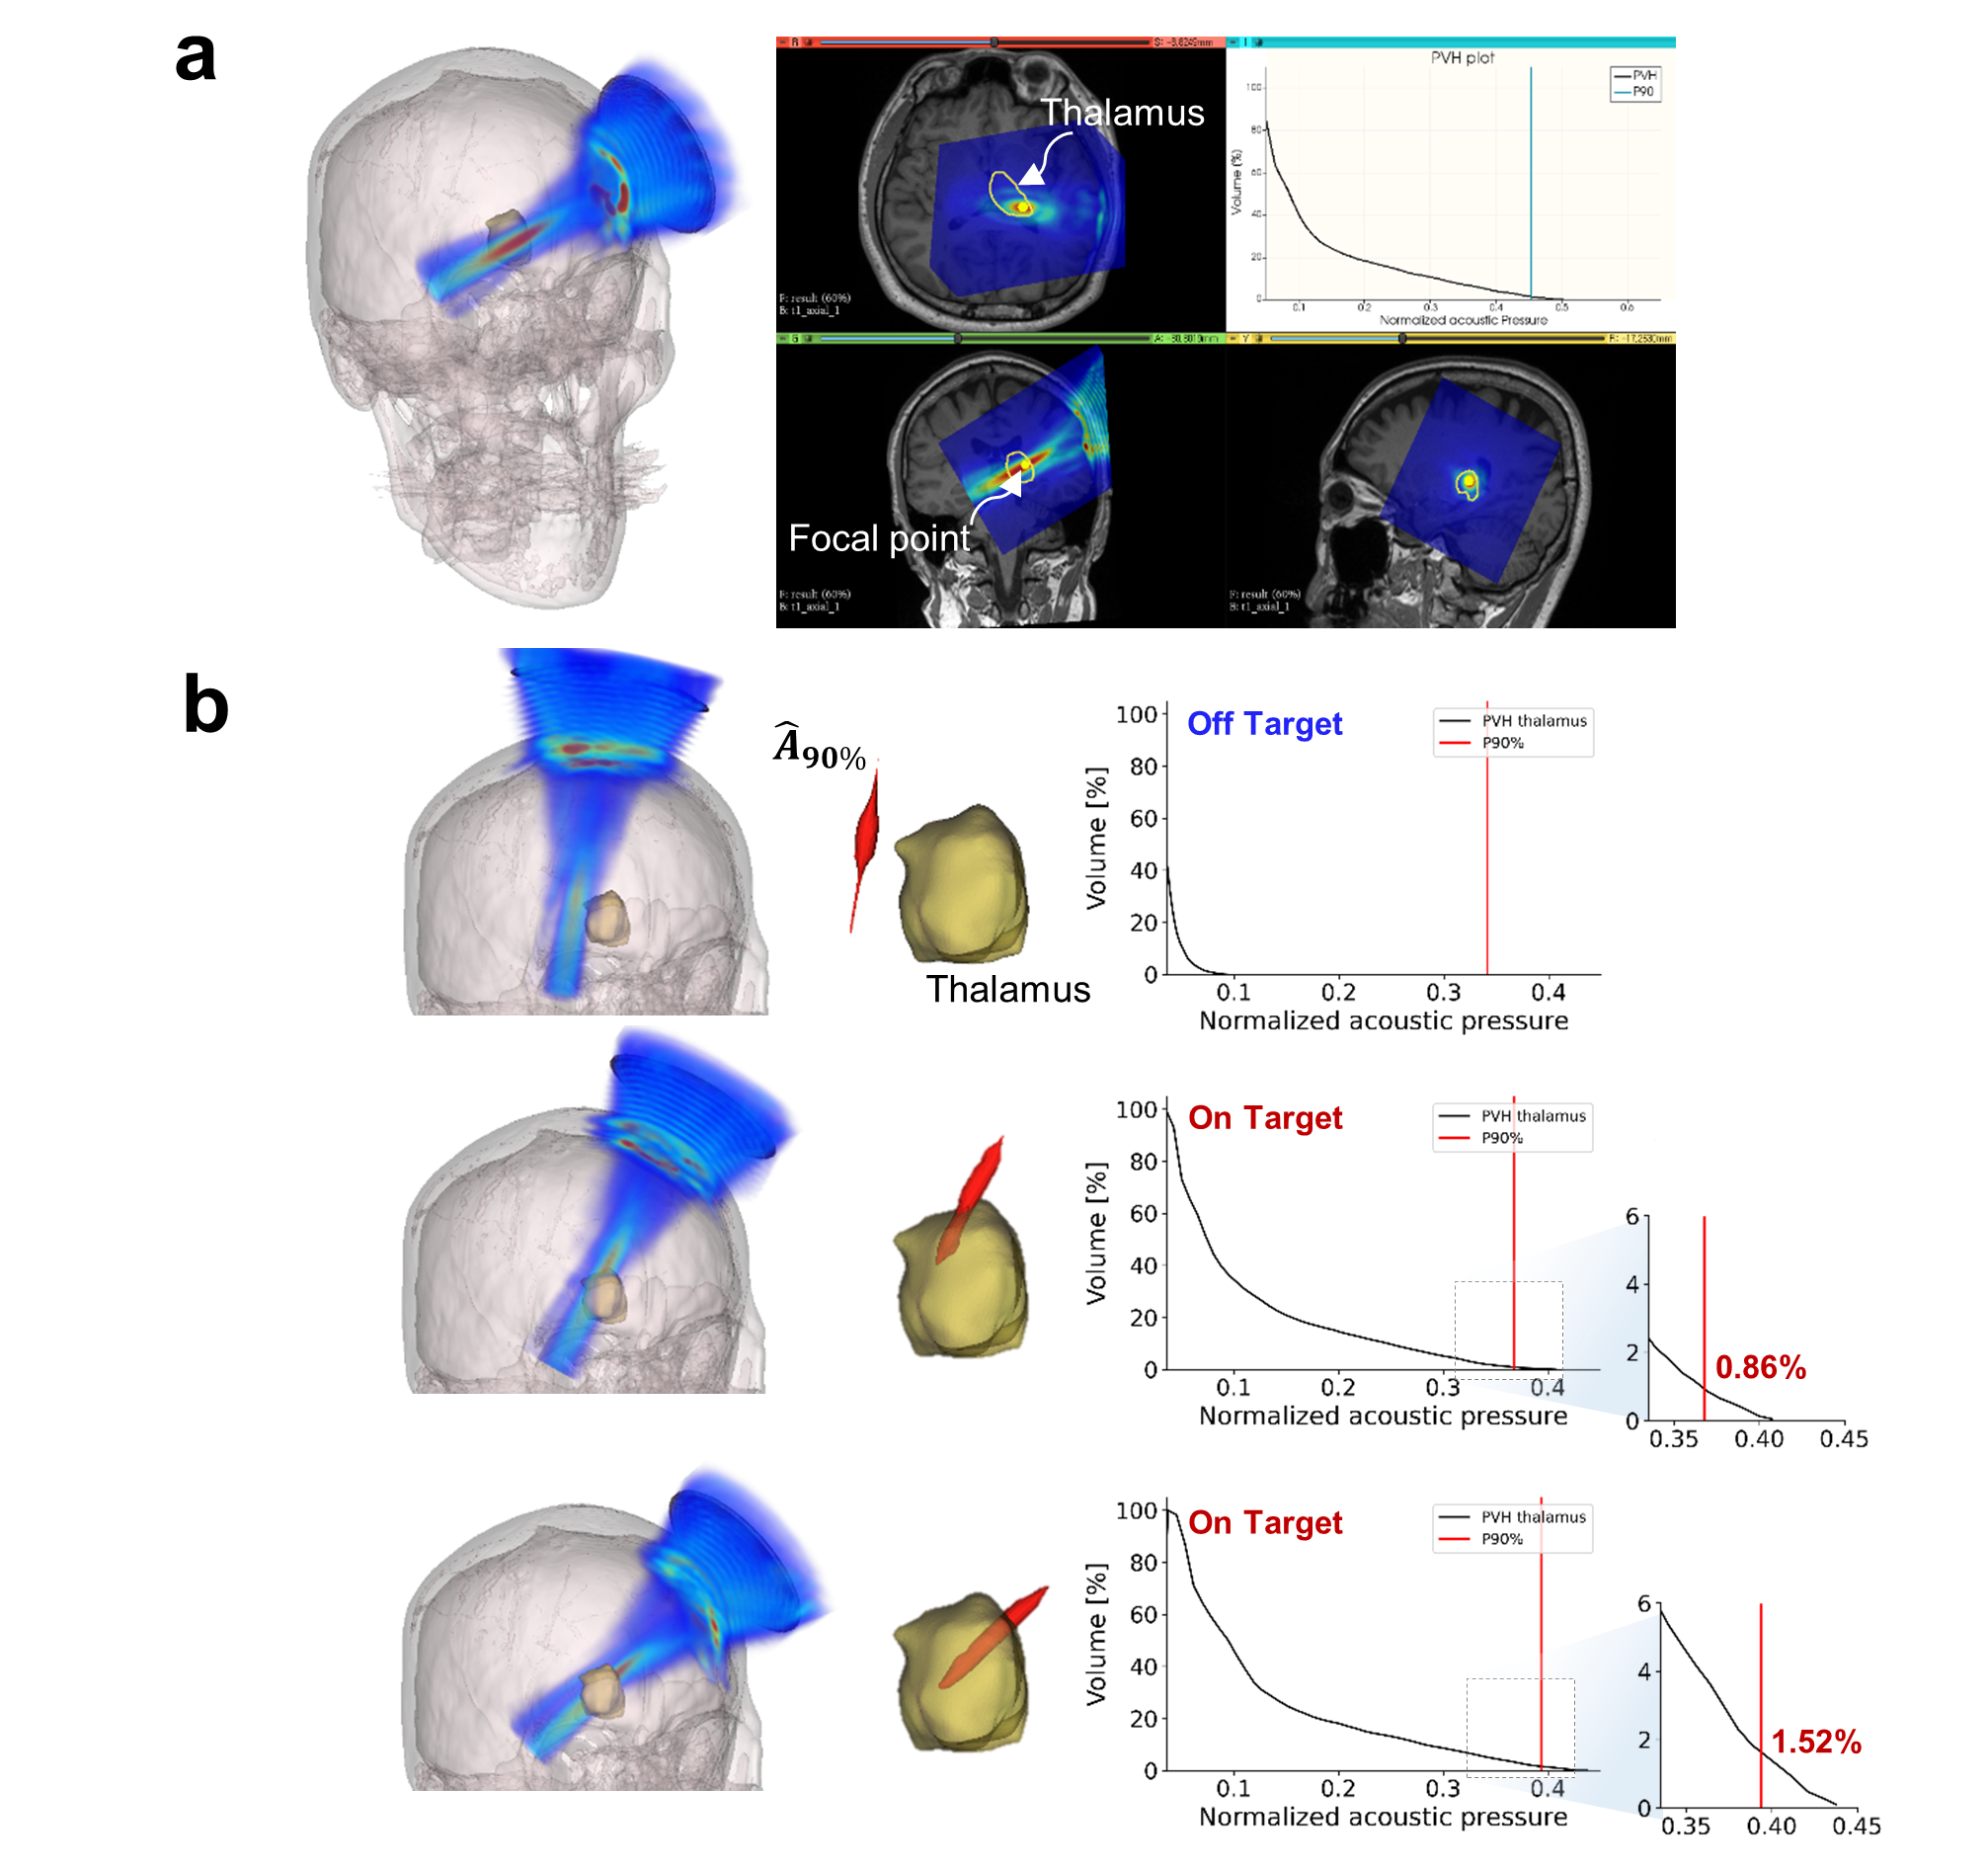 [Figure 2] Clinical Application Examples for Simulation-Guided Navigation